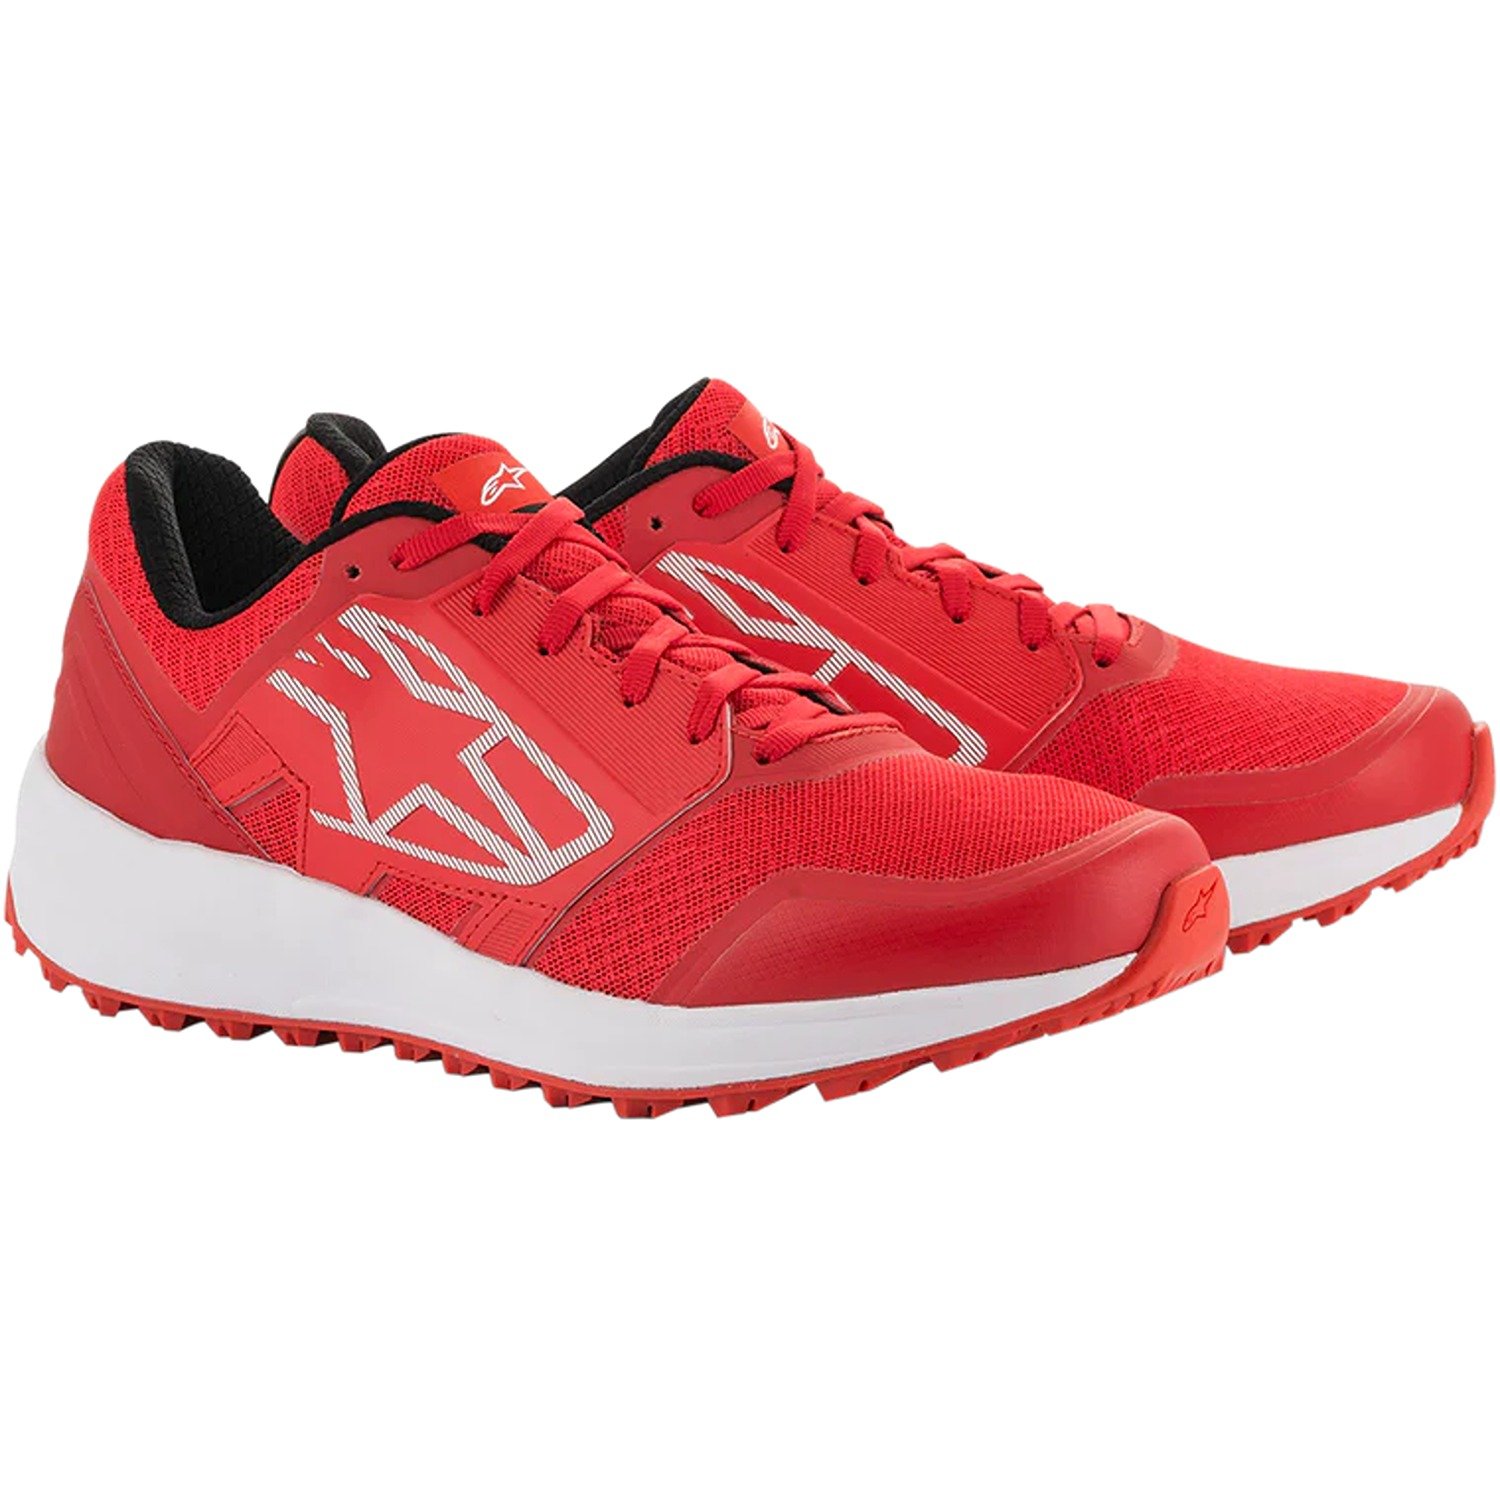 Image of EU Alpinestars Meta Trail Shoes Red White Taille US 4